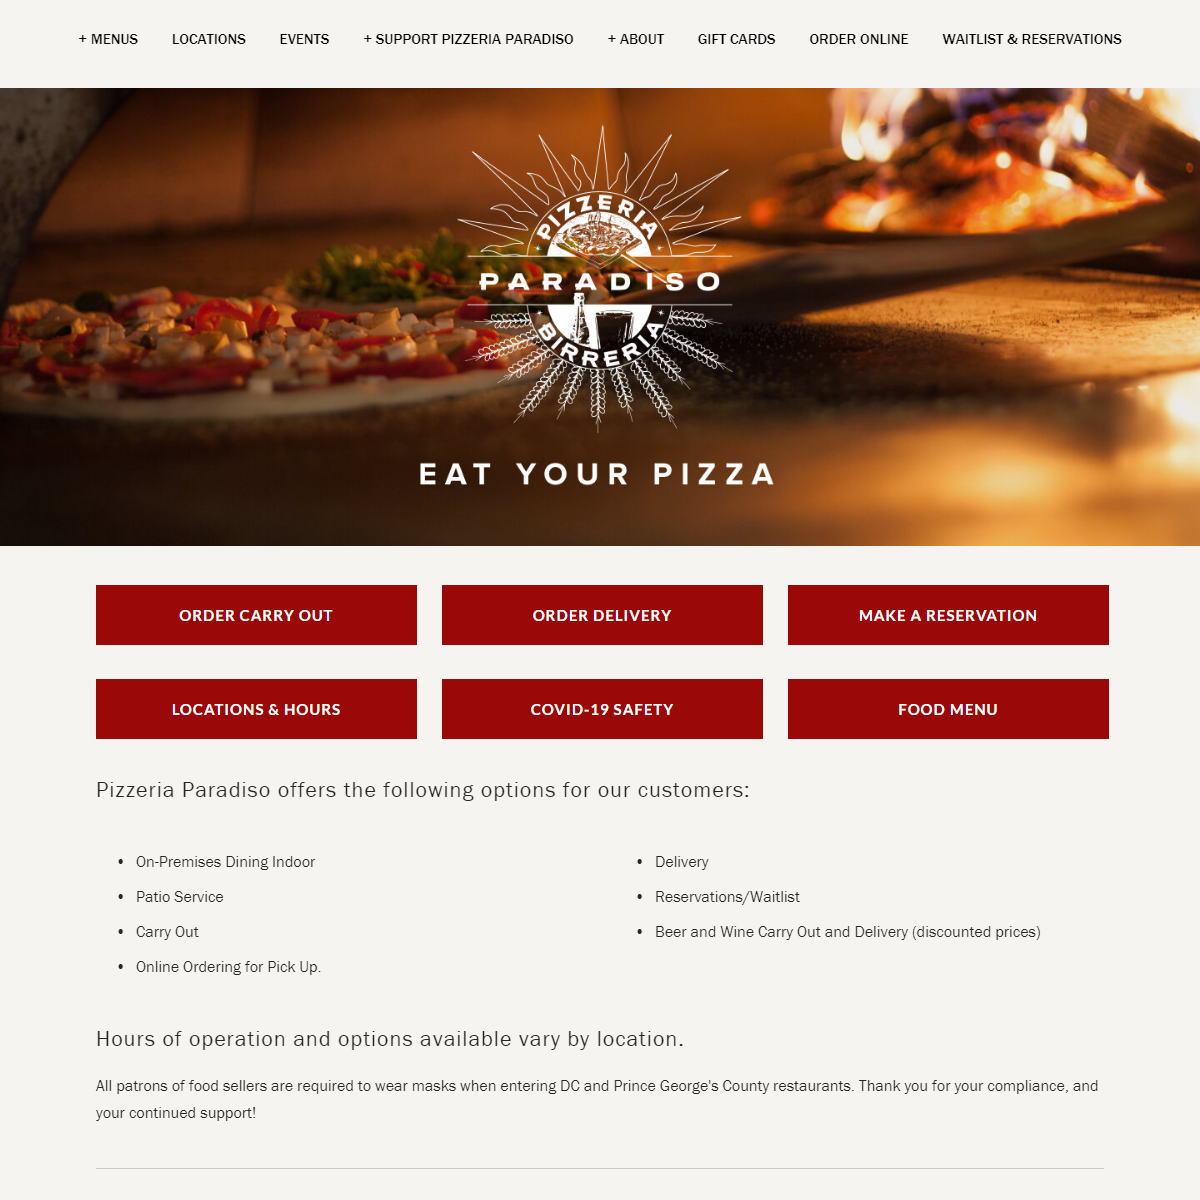 A complete backup of https://www.eatyourpizza.com/